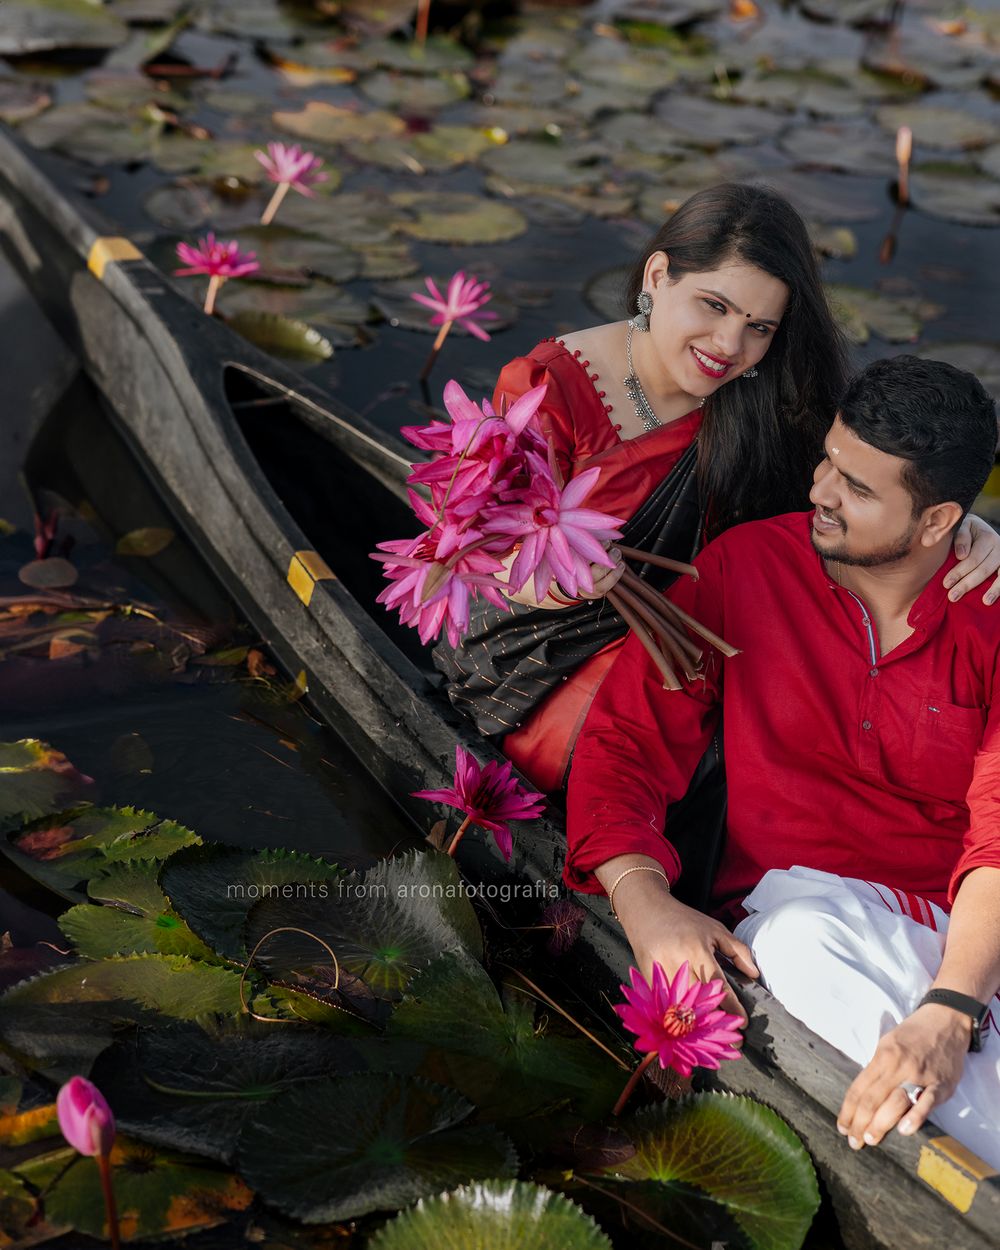 Photo From Lost in love amidst a sea of lilies - By Arona Fotografia